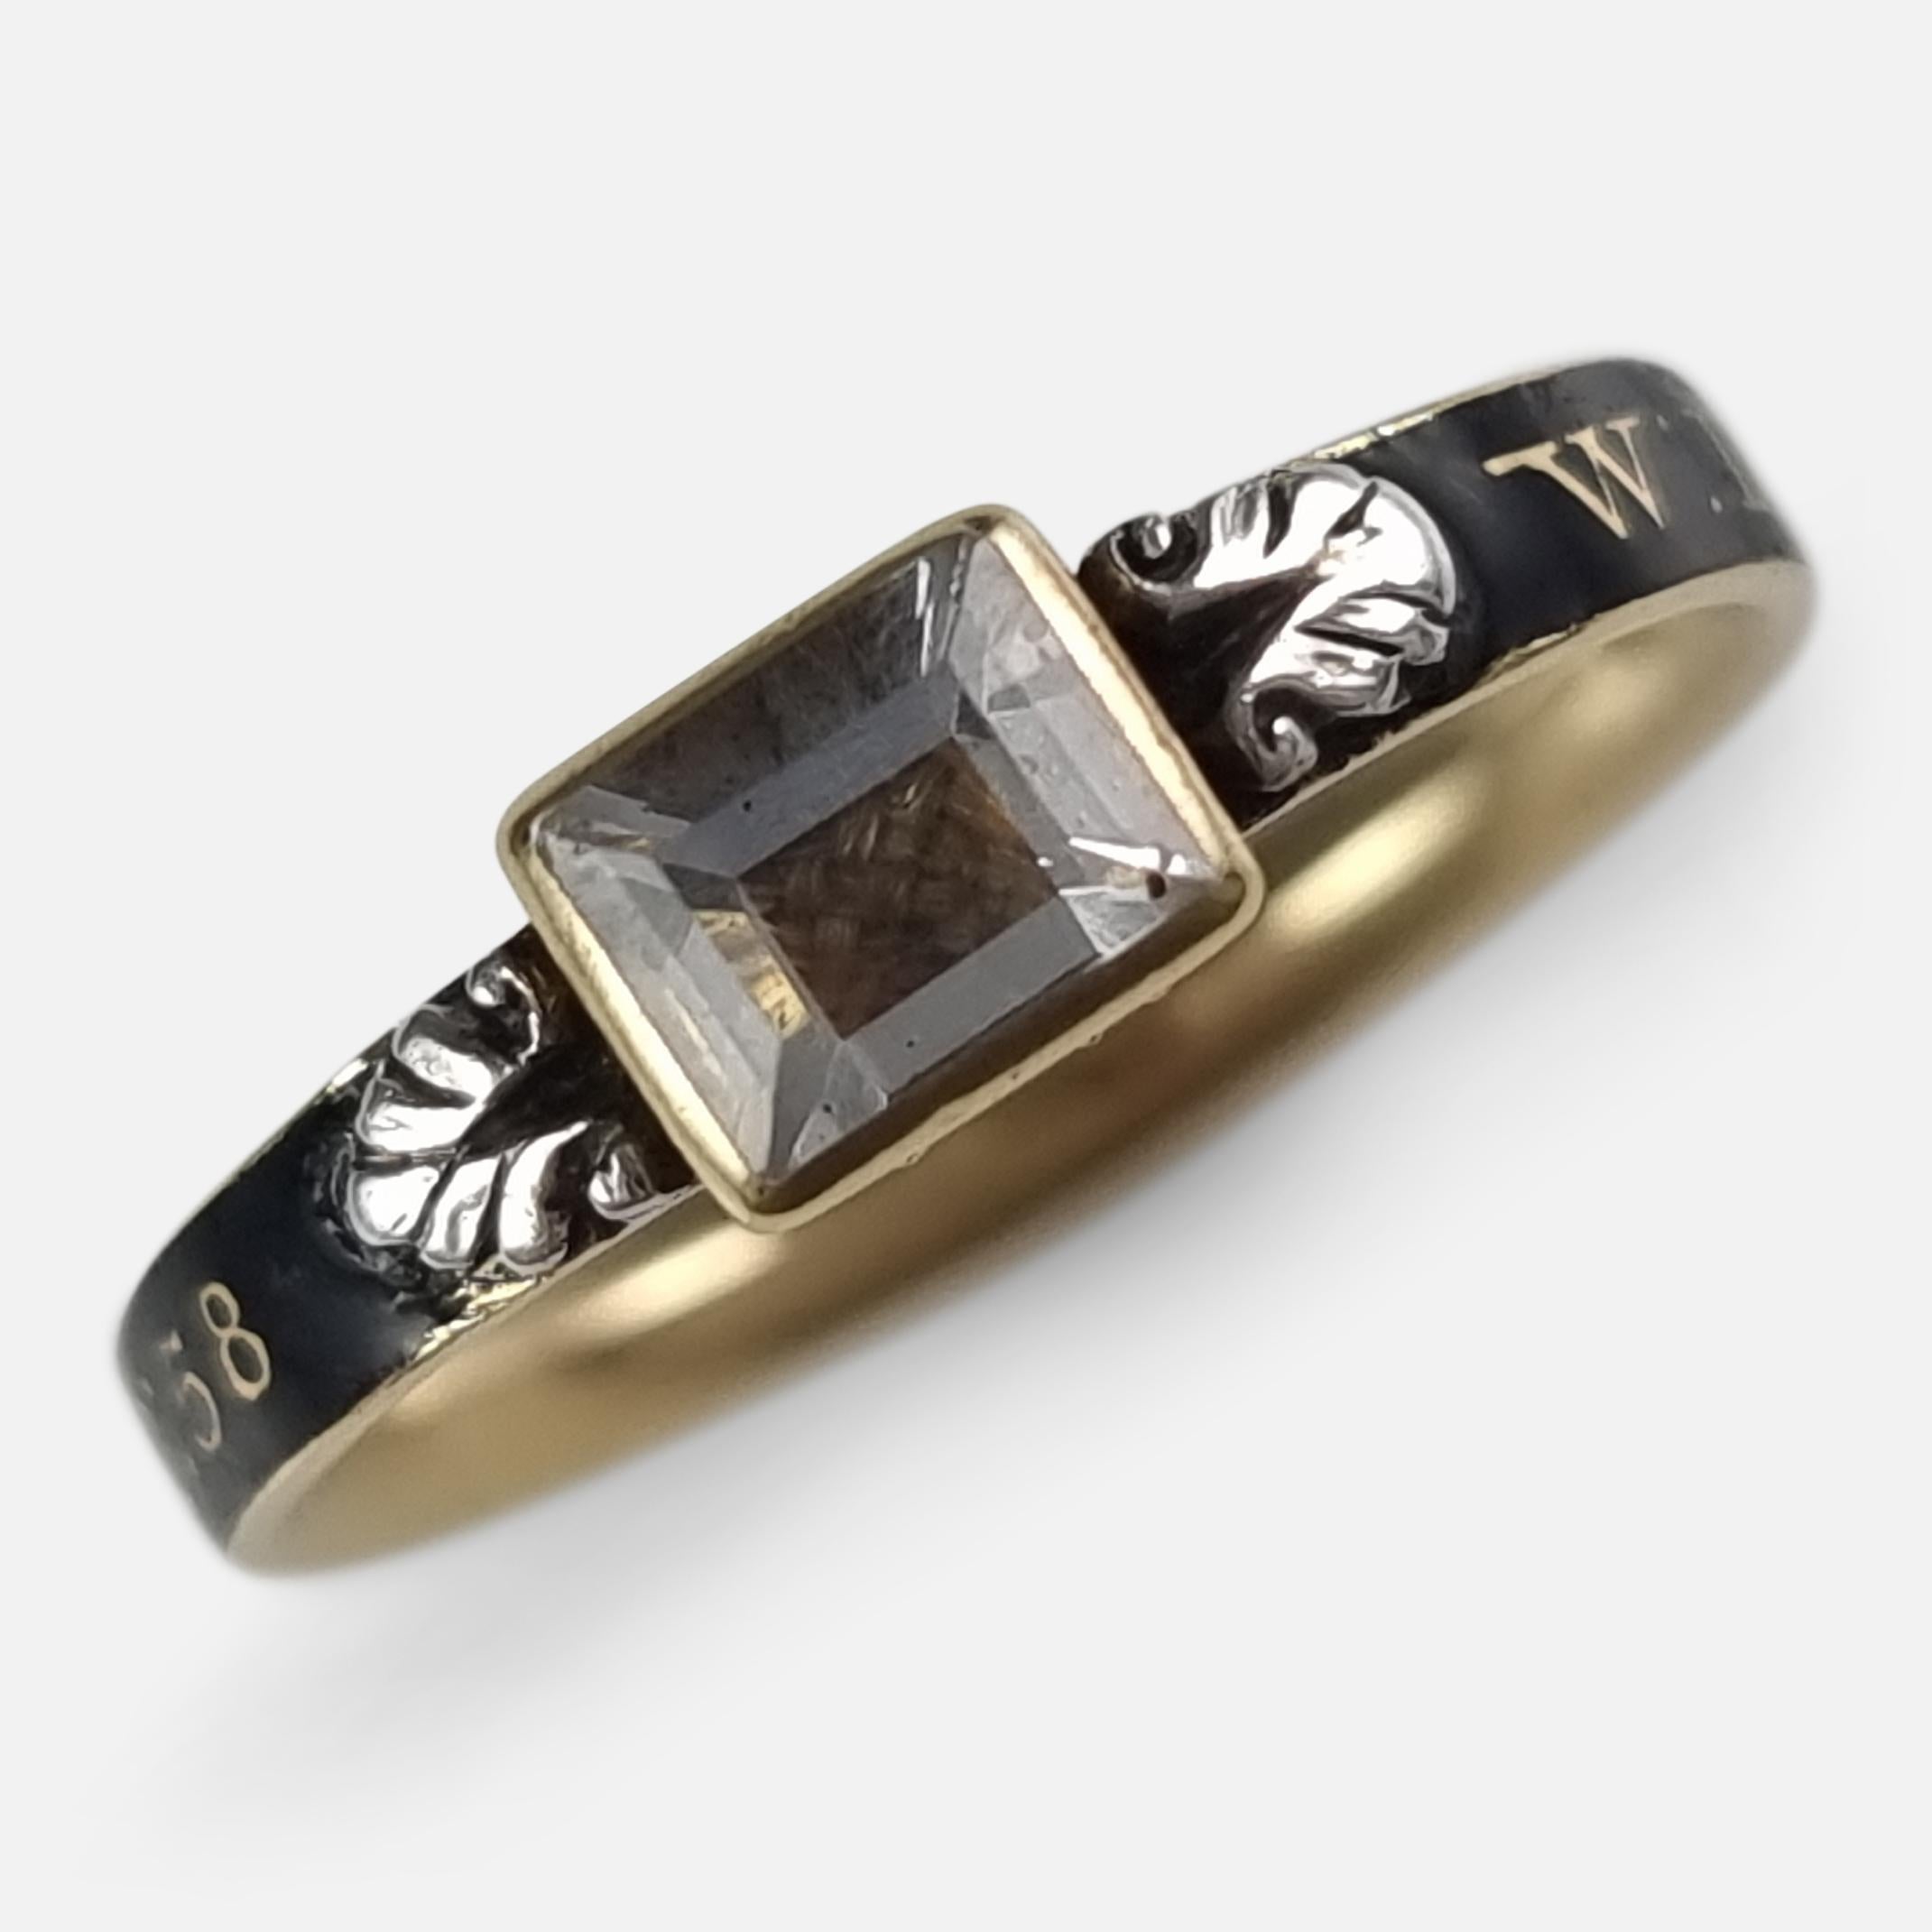 A George I 18ct yellow gold, rock crystal, hair-work, and black enamel mourning ring. The gold ring bears the inscription 